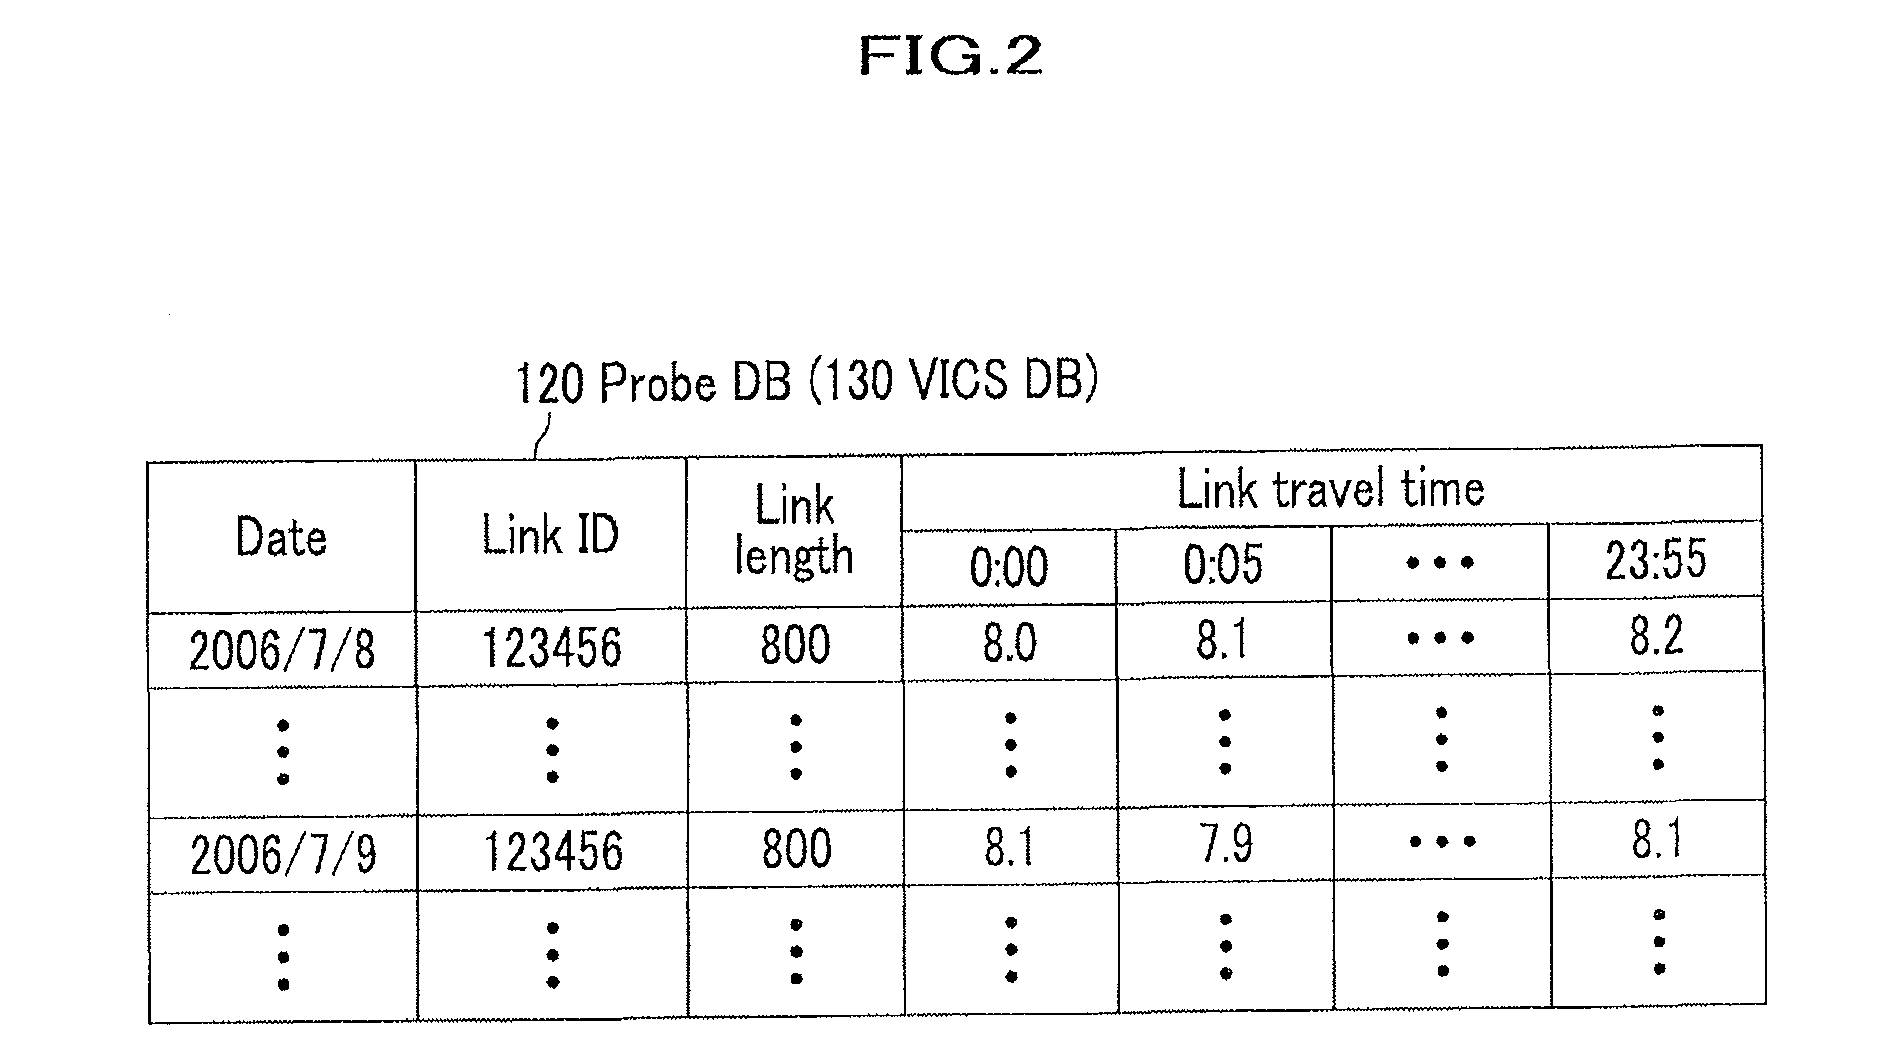 Apparatus and Method for Generating Statistic Traffic Information